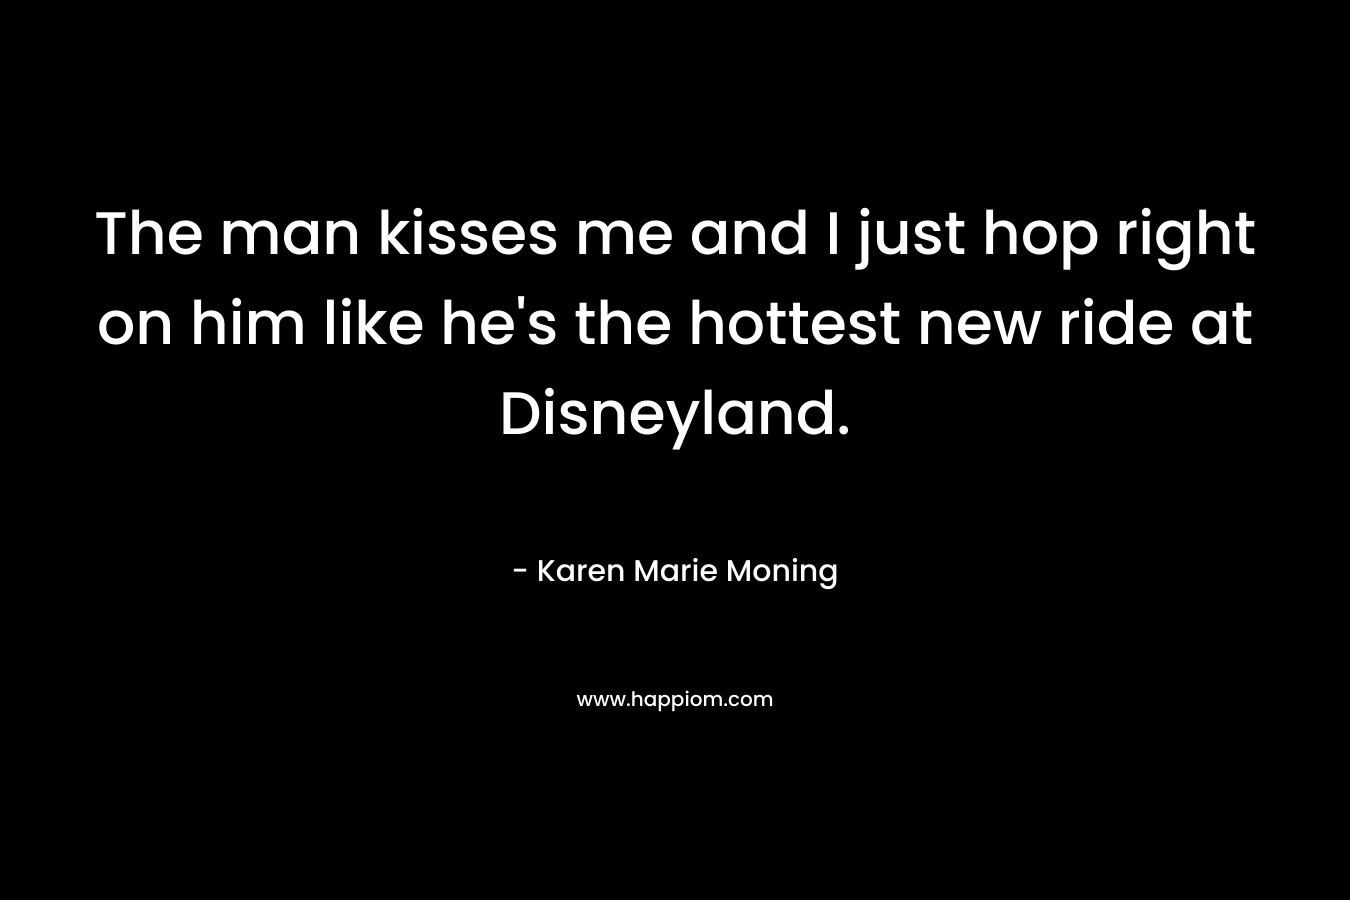 The man kisses me and I just hop right on him like he's the hottest new ride at Disneyland.